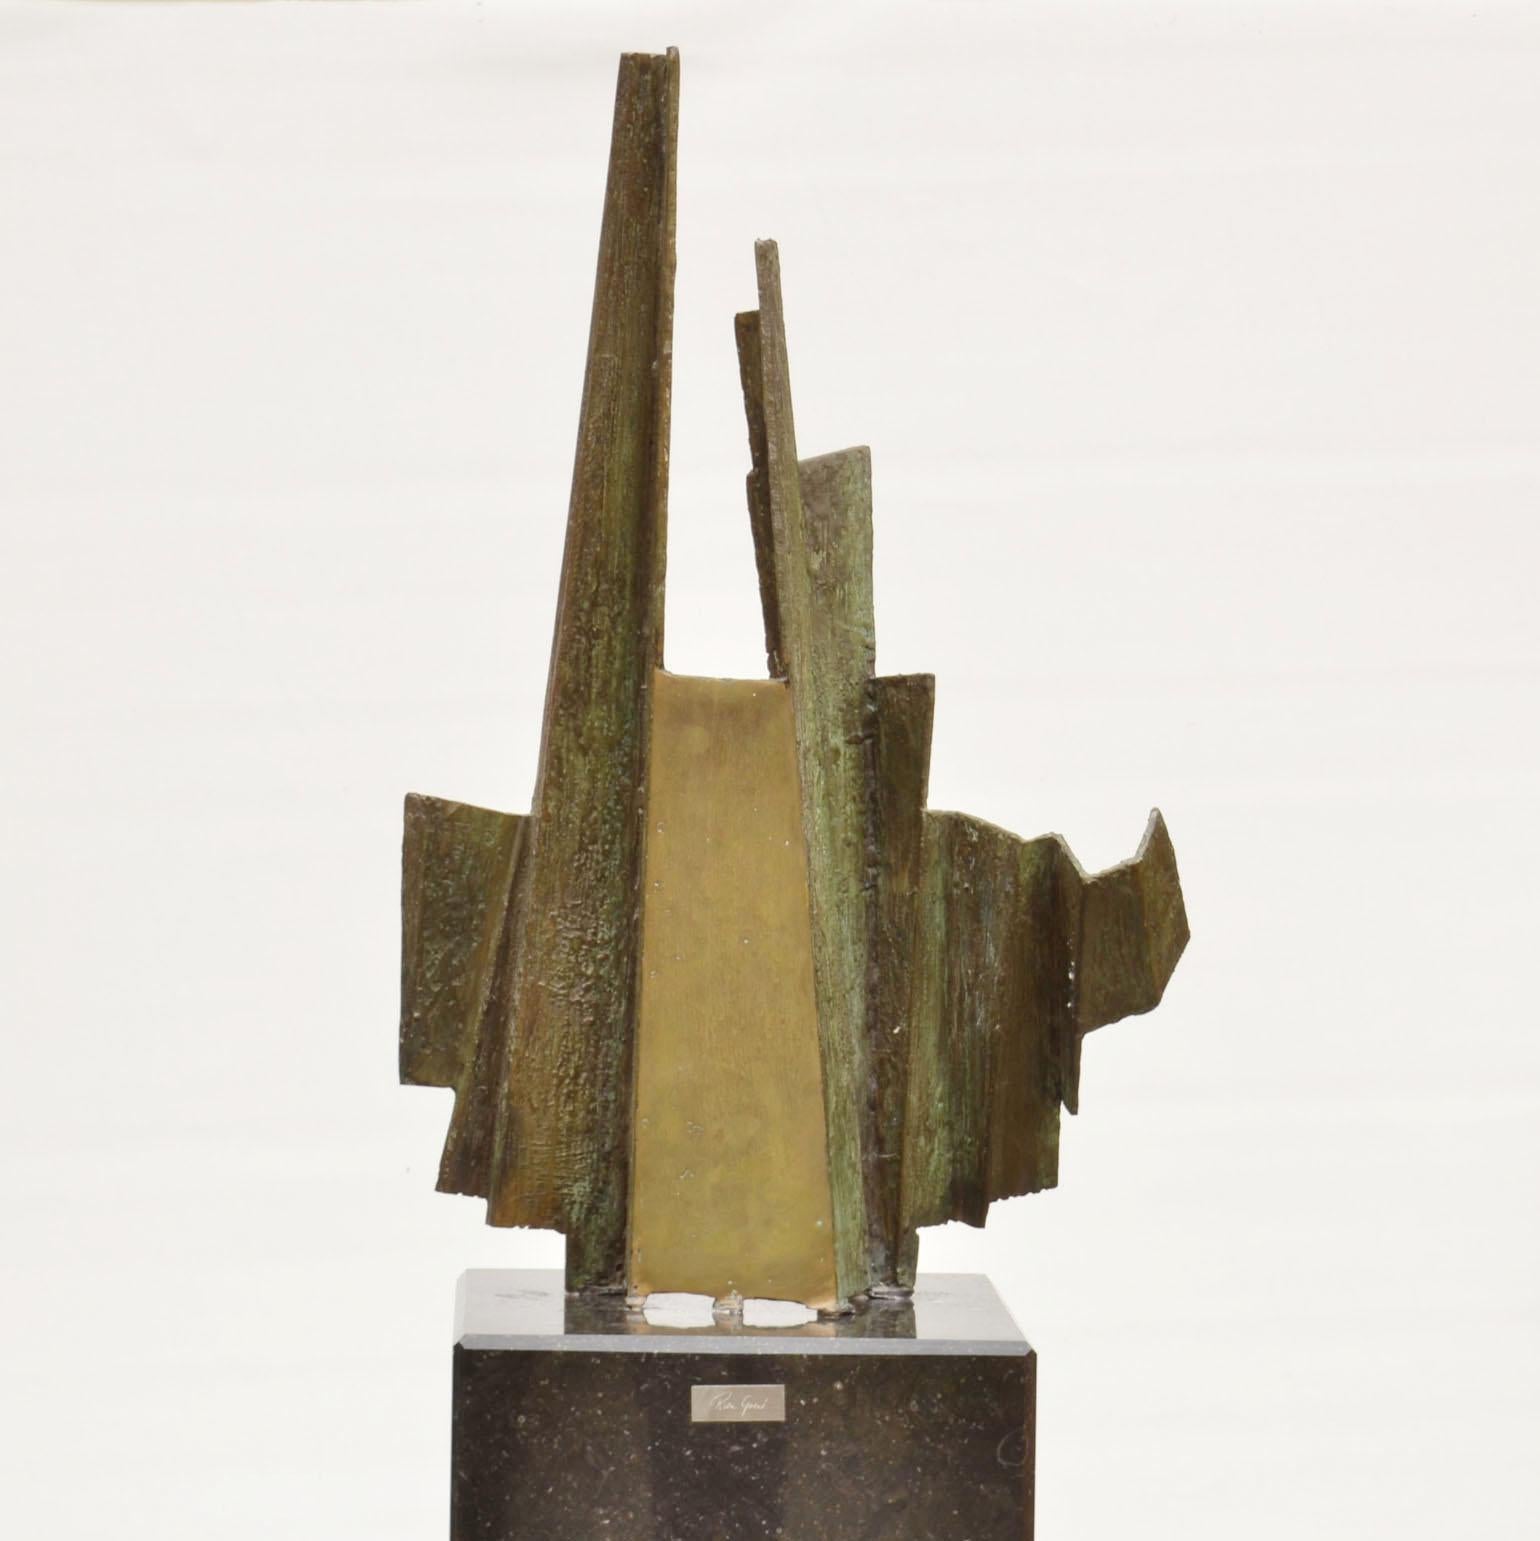 One of a two of Brutalist abstract sculptures by Dutch artist Rien Goené (1929-2013) circa 1980, signed. The asymmetrical concertina shaped bronze sculpture is colored with a light green patina. Where areas are rubbed back they reveal the warm